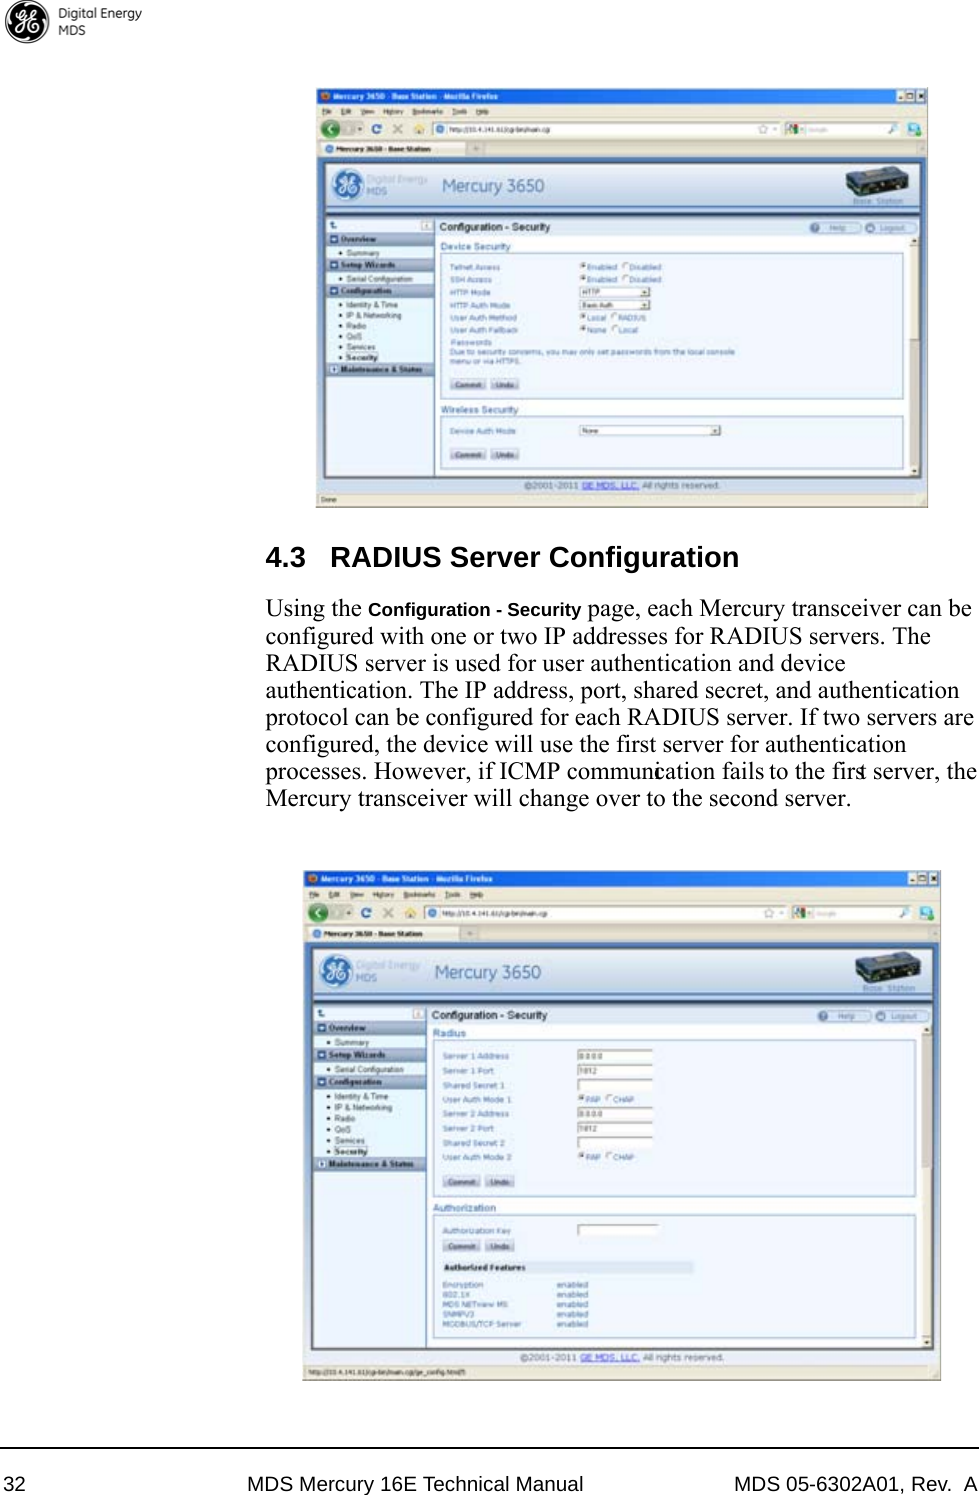 32 MDS Mercury 16E Technical Manual MDS 05-6302A01, Rev.  A4.3 RADIUS Server ConfigurationUsing the Configuration - Security page, each Mercury transceiver can be configured with one or two IP addresses for RADIUS servers. The RADIUS server is used for user authentication and device authentication. The IP address, port, shared secret, and authentication protocol can be configured for each RADIUS server. If two servers are configured, the device will use the first server for authentication processes. However, if ICMP communication fails to the first server, the Mercury transceiver will change over to the second server.